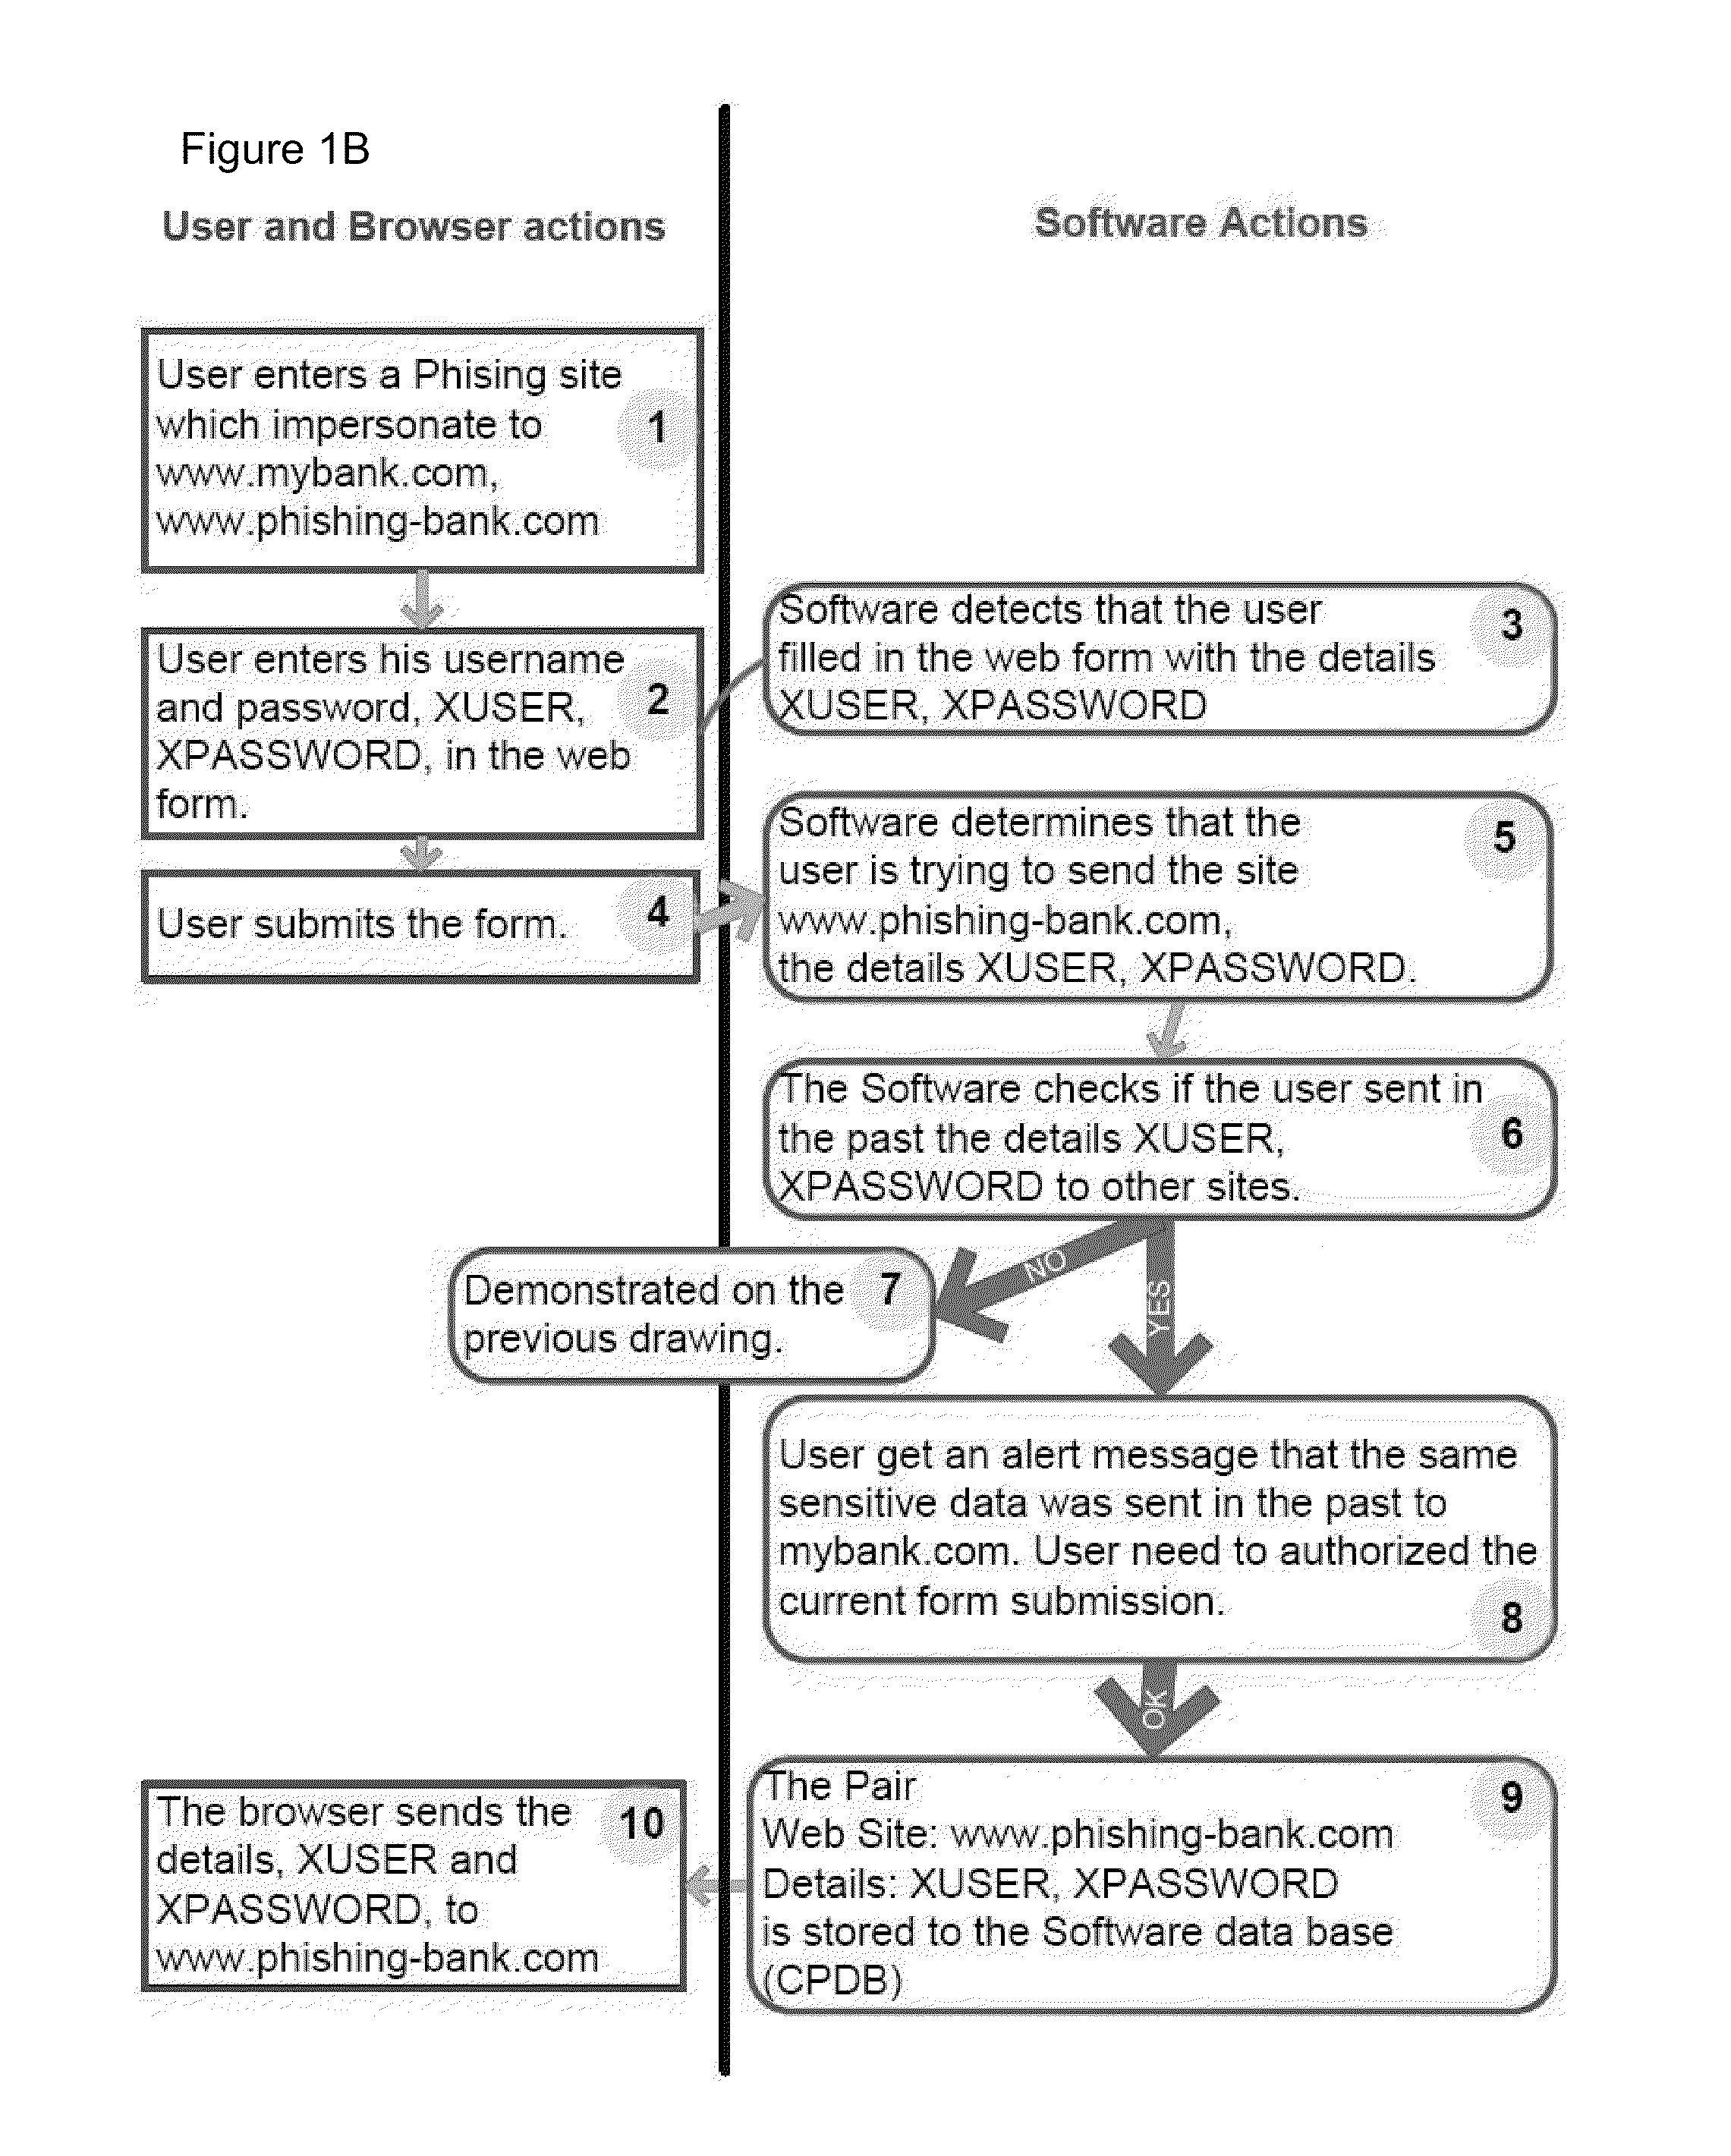 System and method for security of sensitive information through a network connection